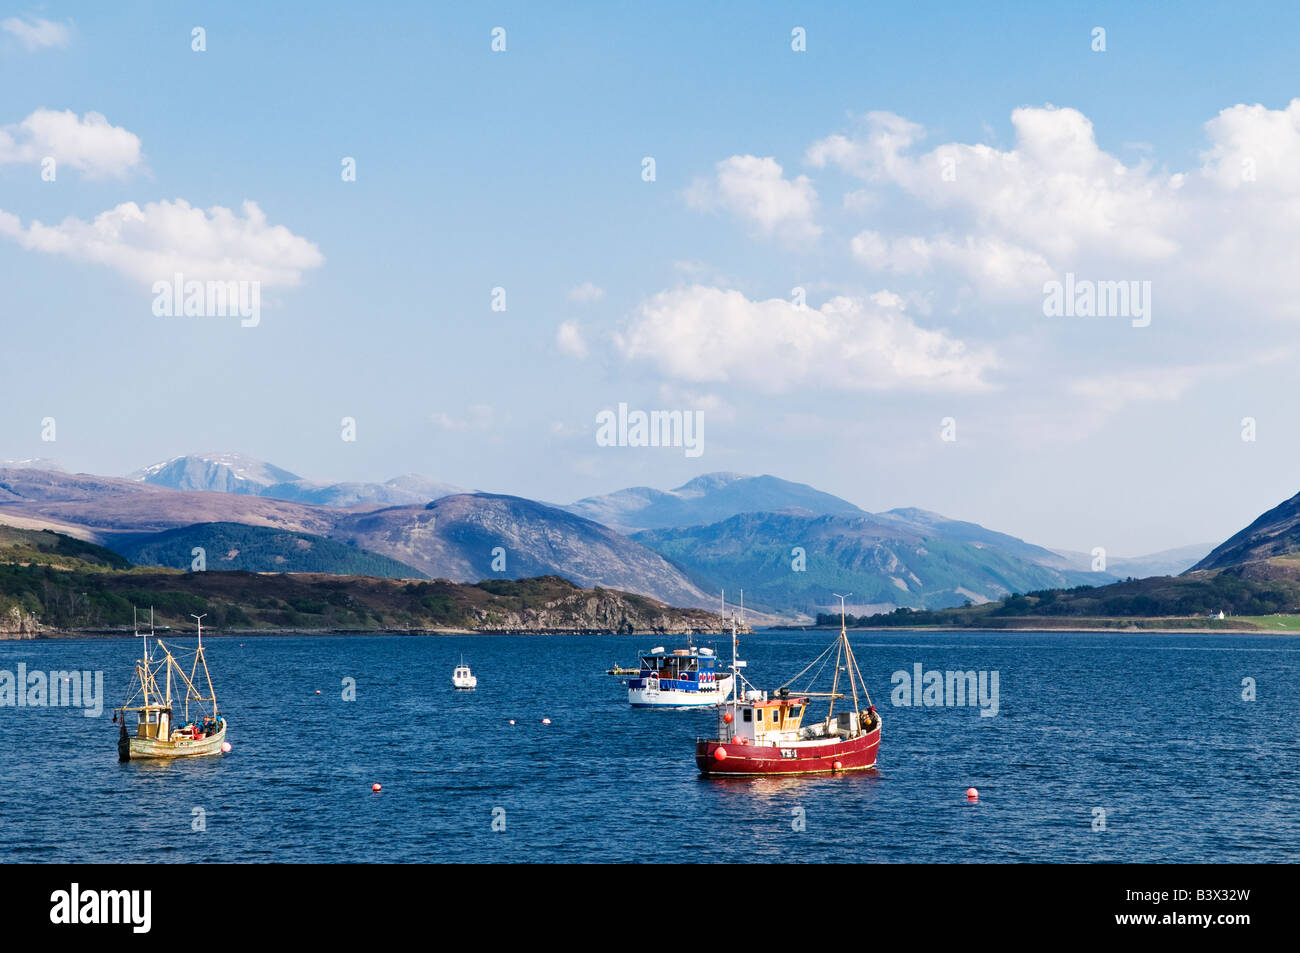 Fishing boats moored in Loch Broom on a sunny day, Ullapool, Scotland Stock Photo